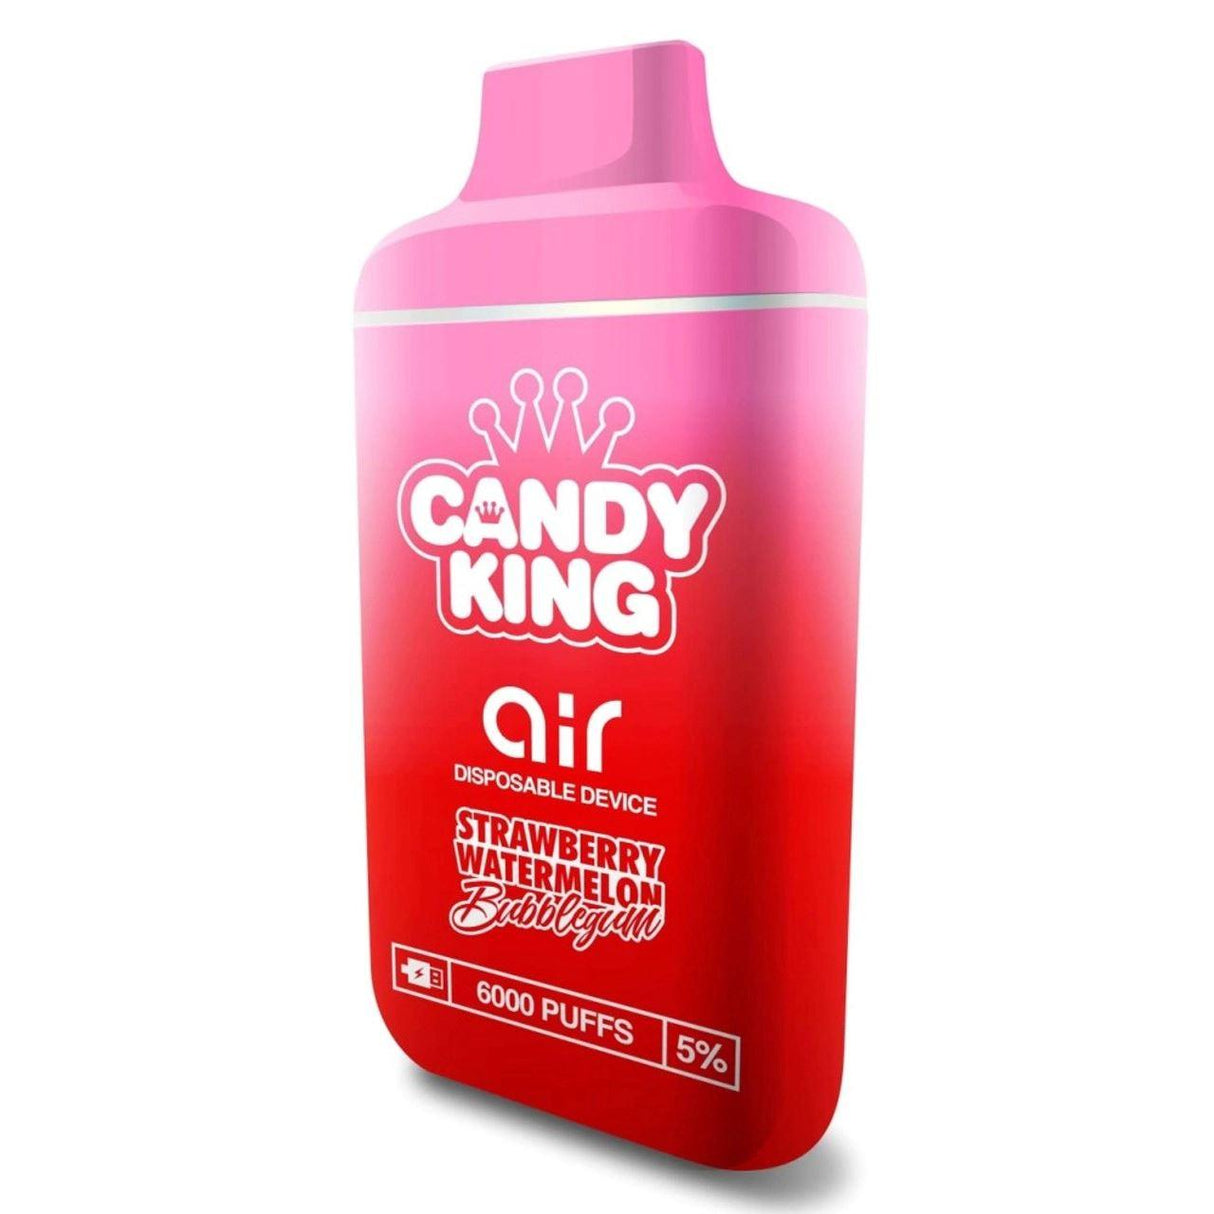 Candy King Air Disposable Vape 6000 Puffs - 6 Pack